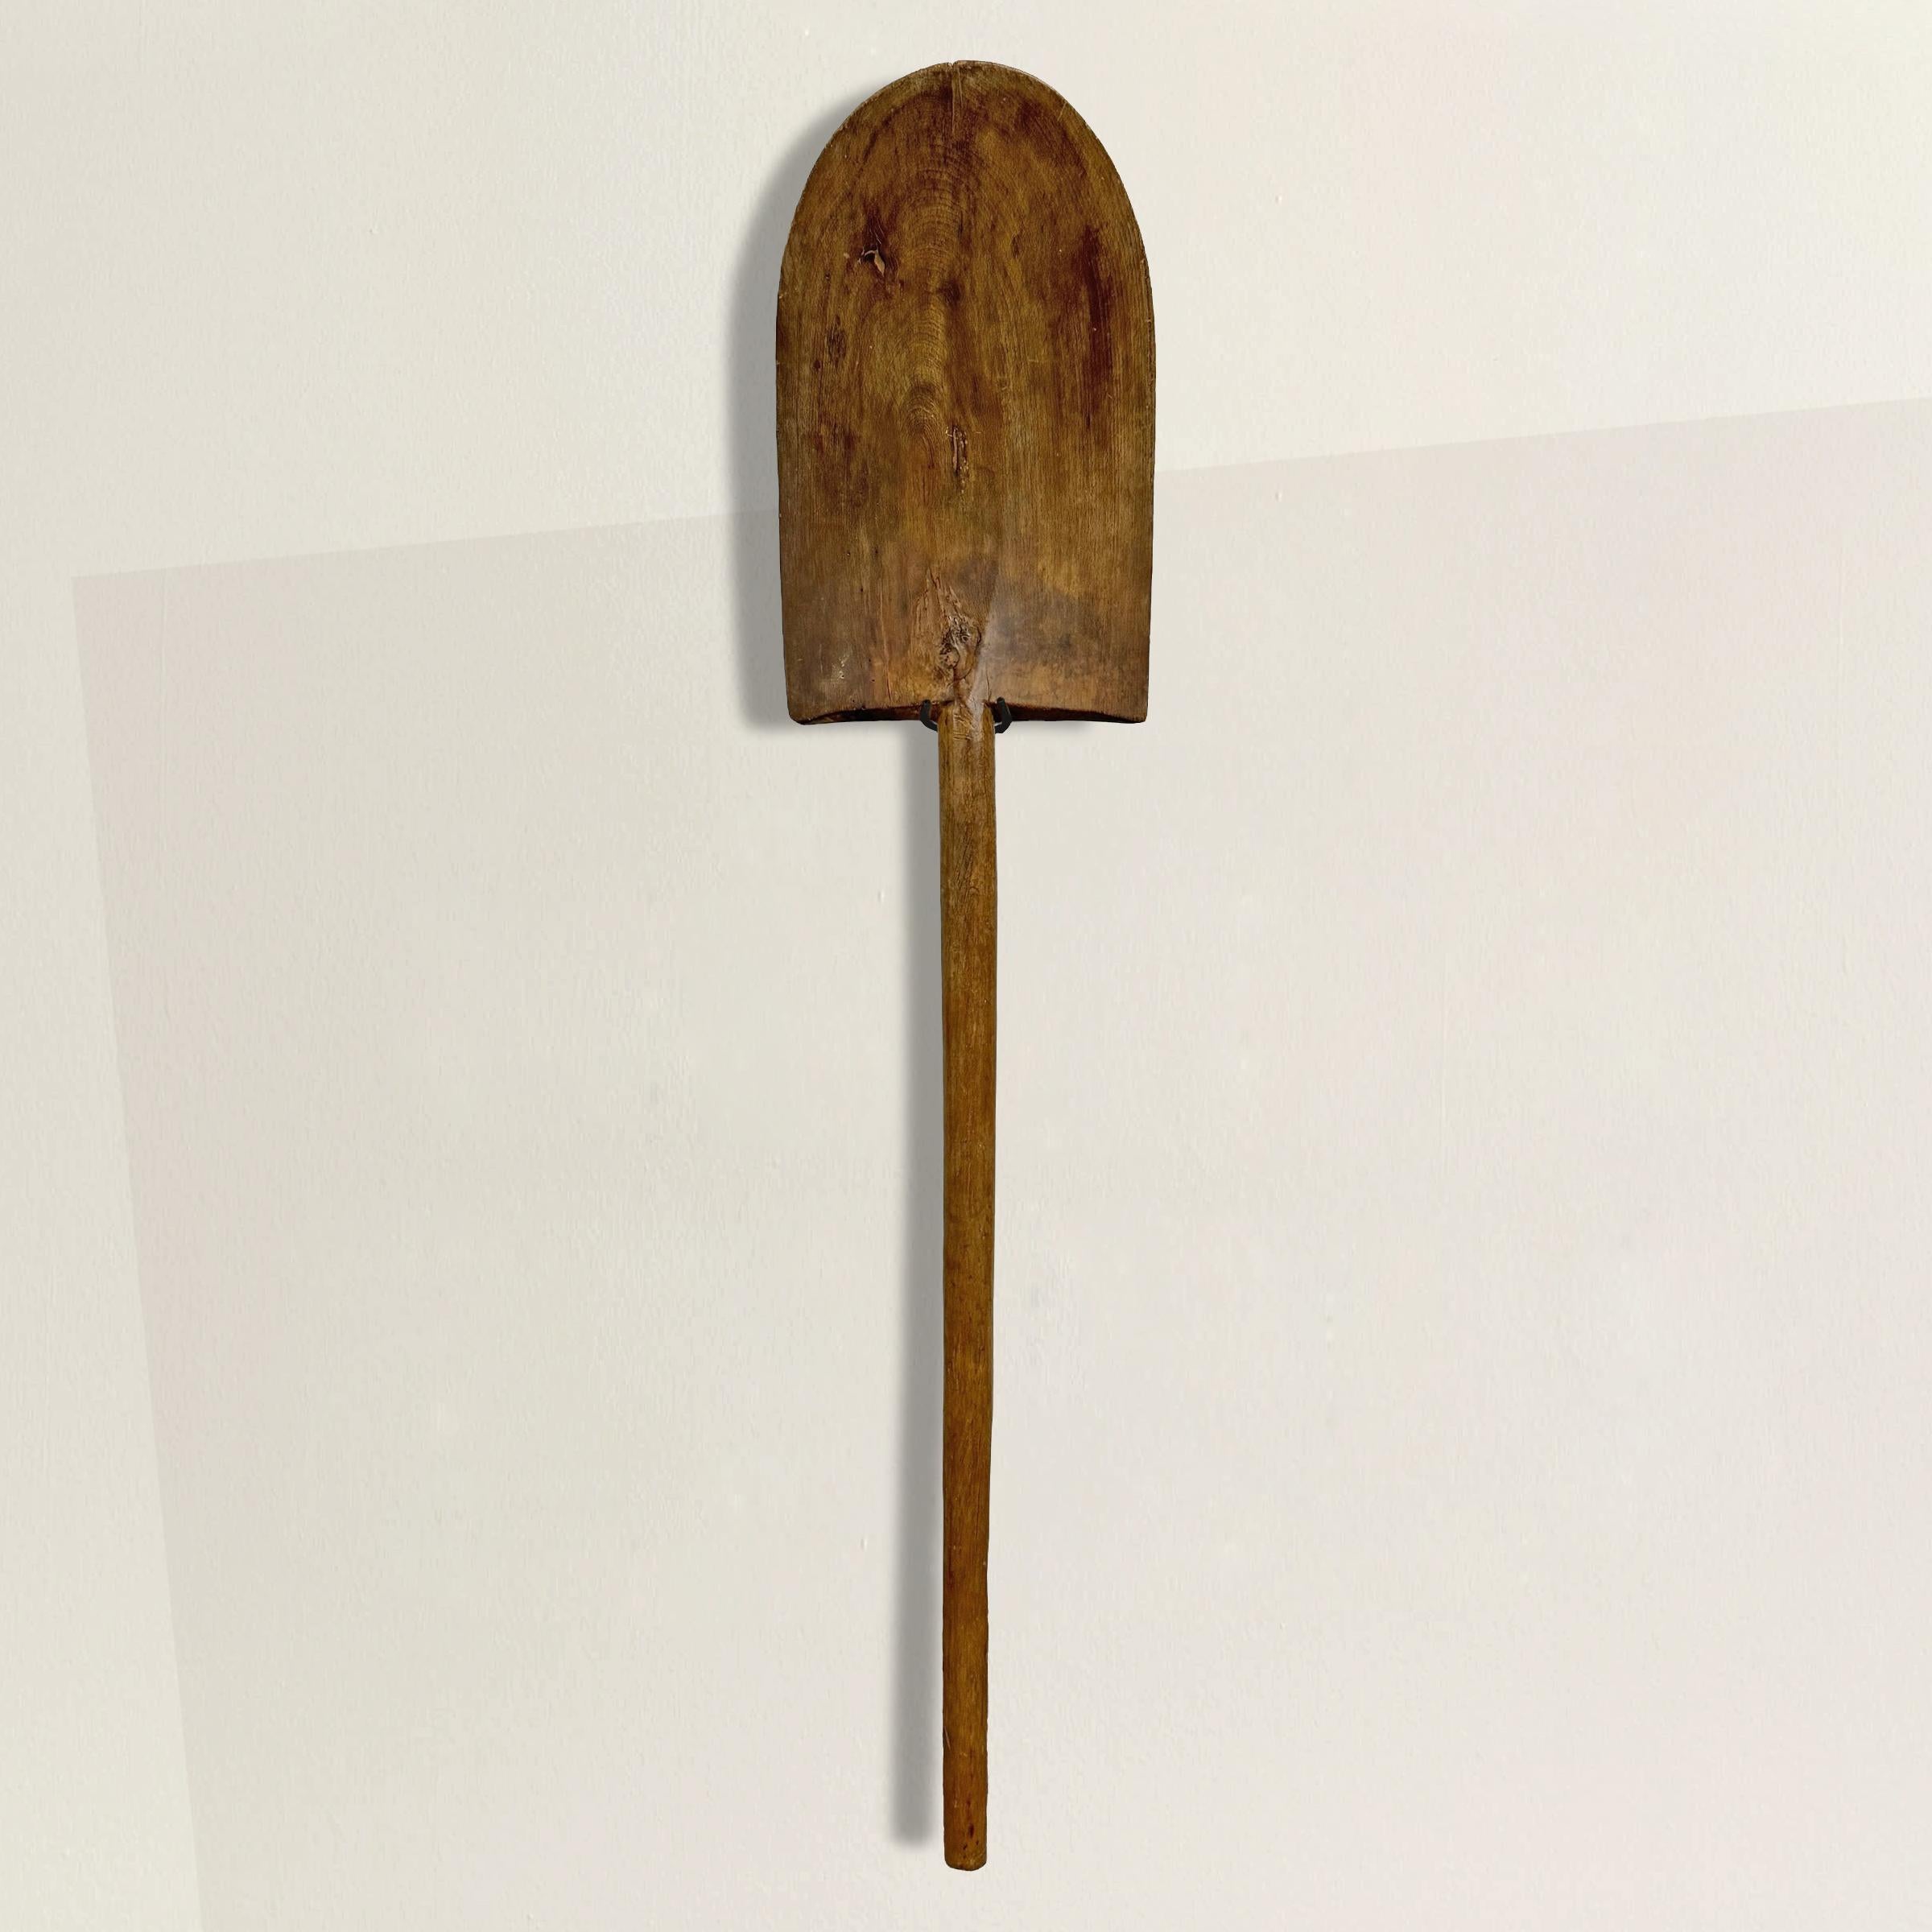 This 19th-century French hand-carved wood walnut garden spade is a stunning testament to craftsmanship and industry from a bygone era. Its beautifully aged walnut wood bears a remarkable, glowing patina, a testament to years of use and care.

Once